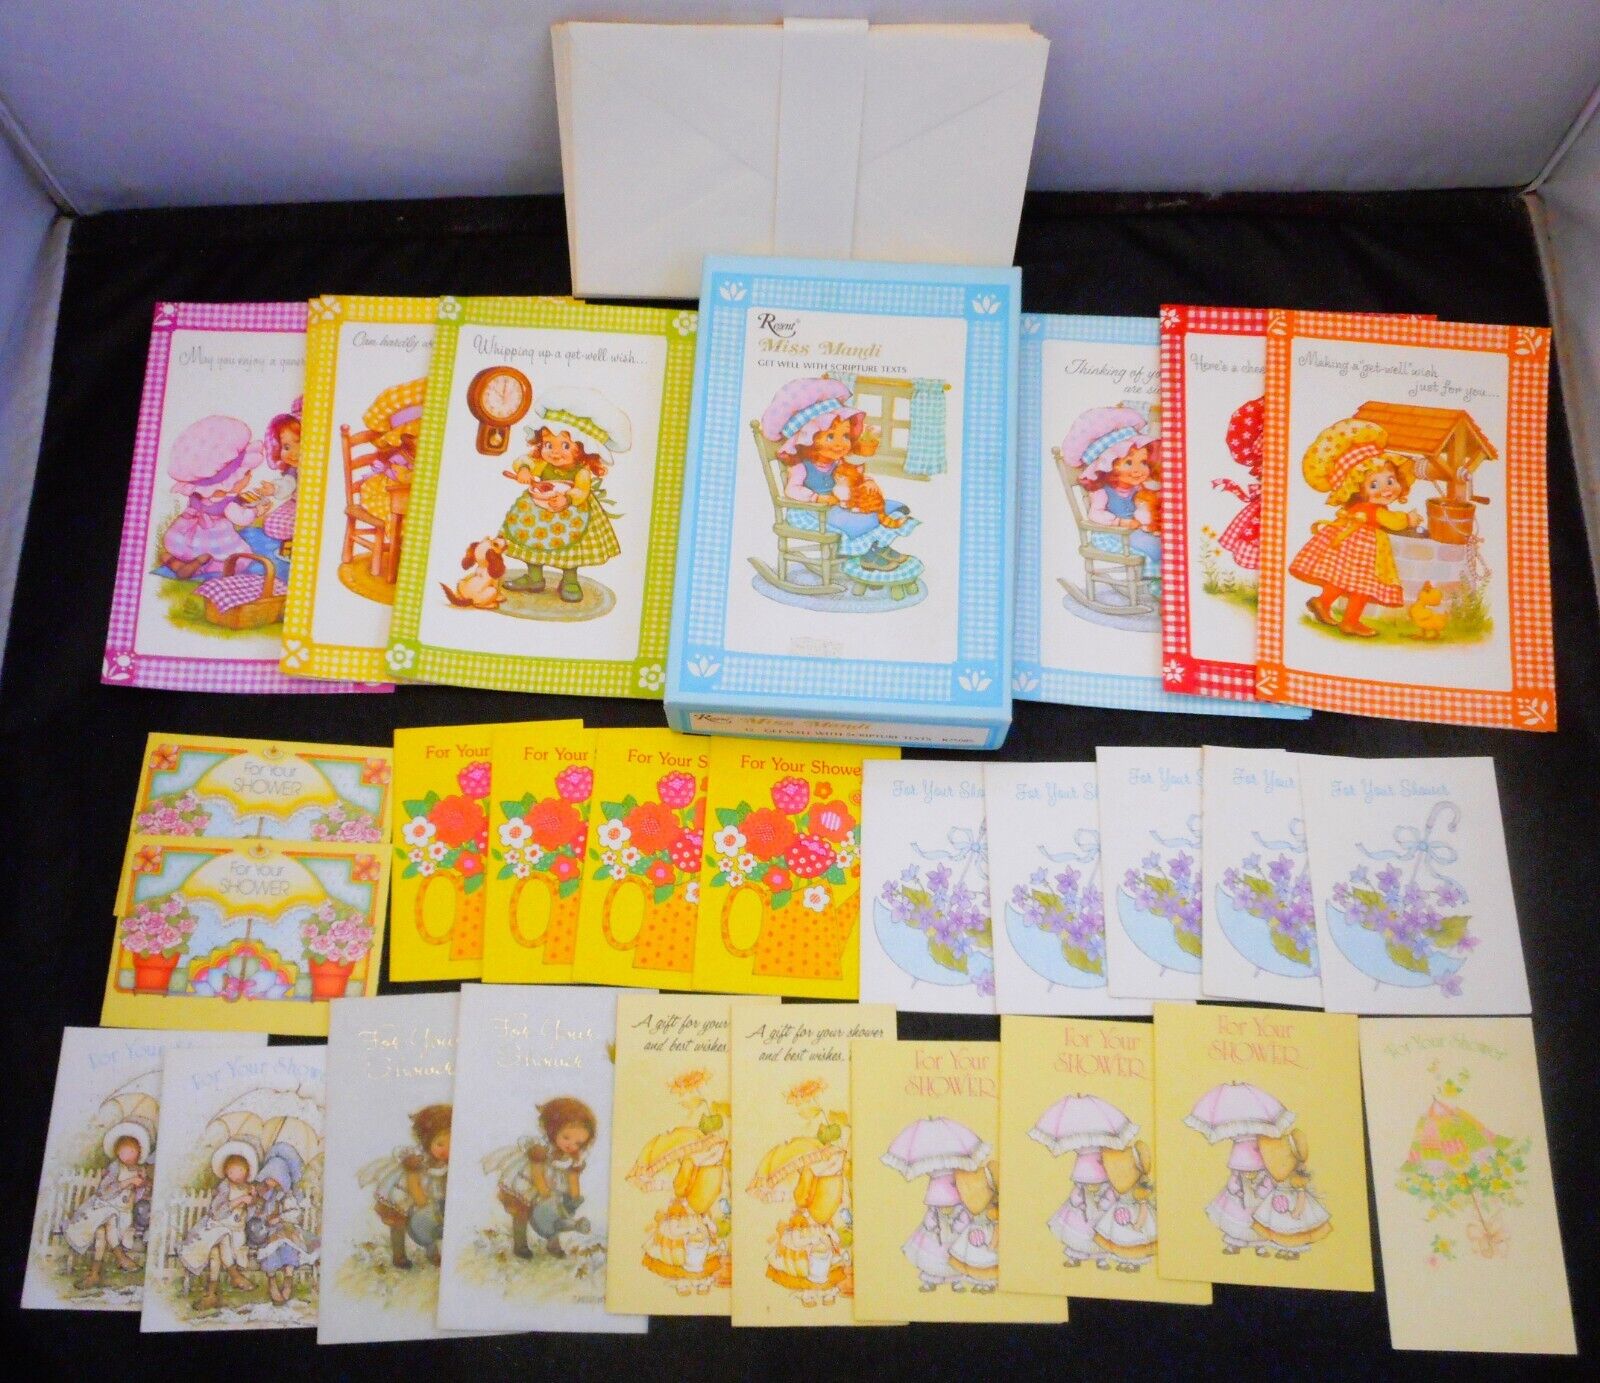 Lot 32 Vintage Unused Greeting Cards Mixed-Holly Hobbie-Sunbonnet Kits-Gretchen+